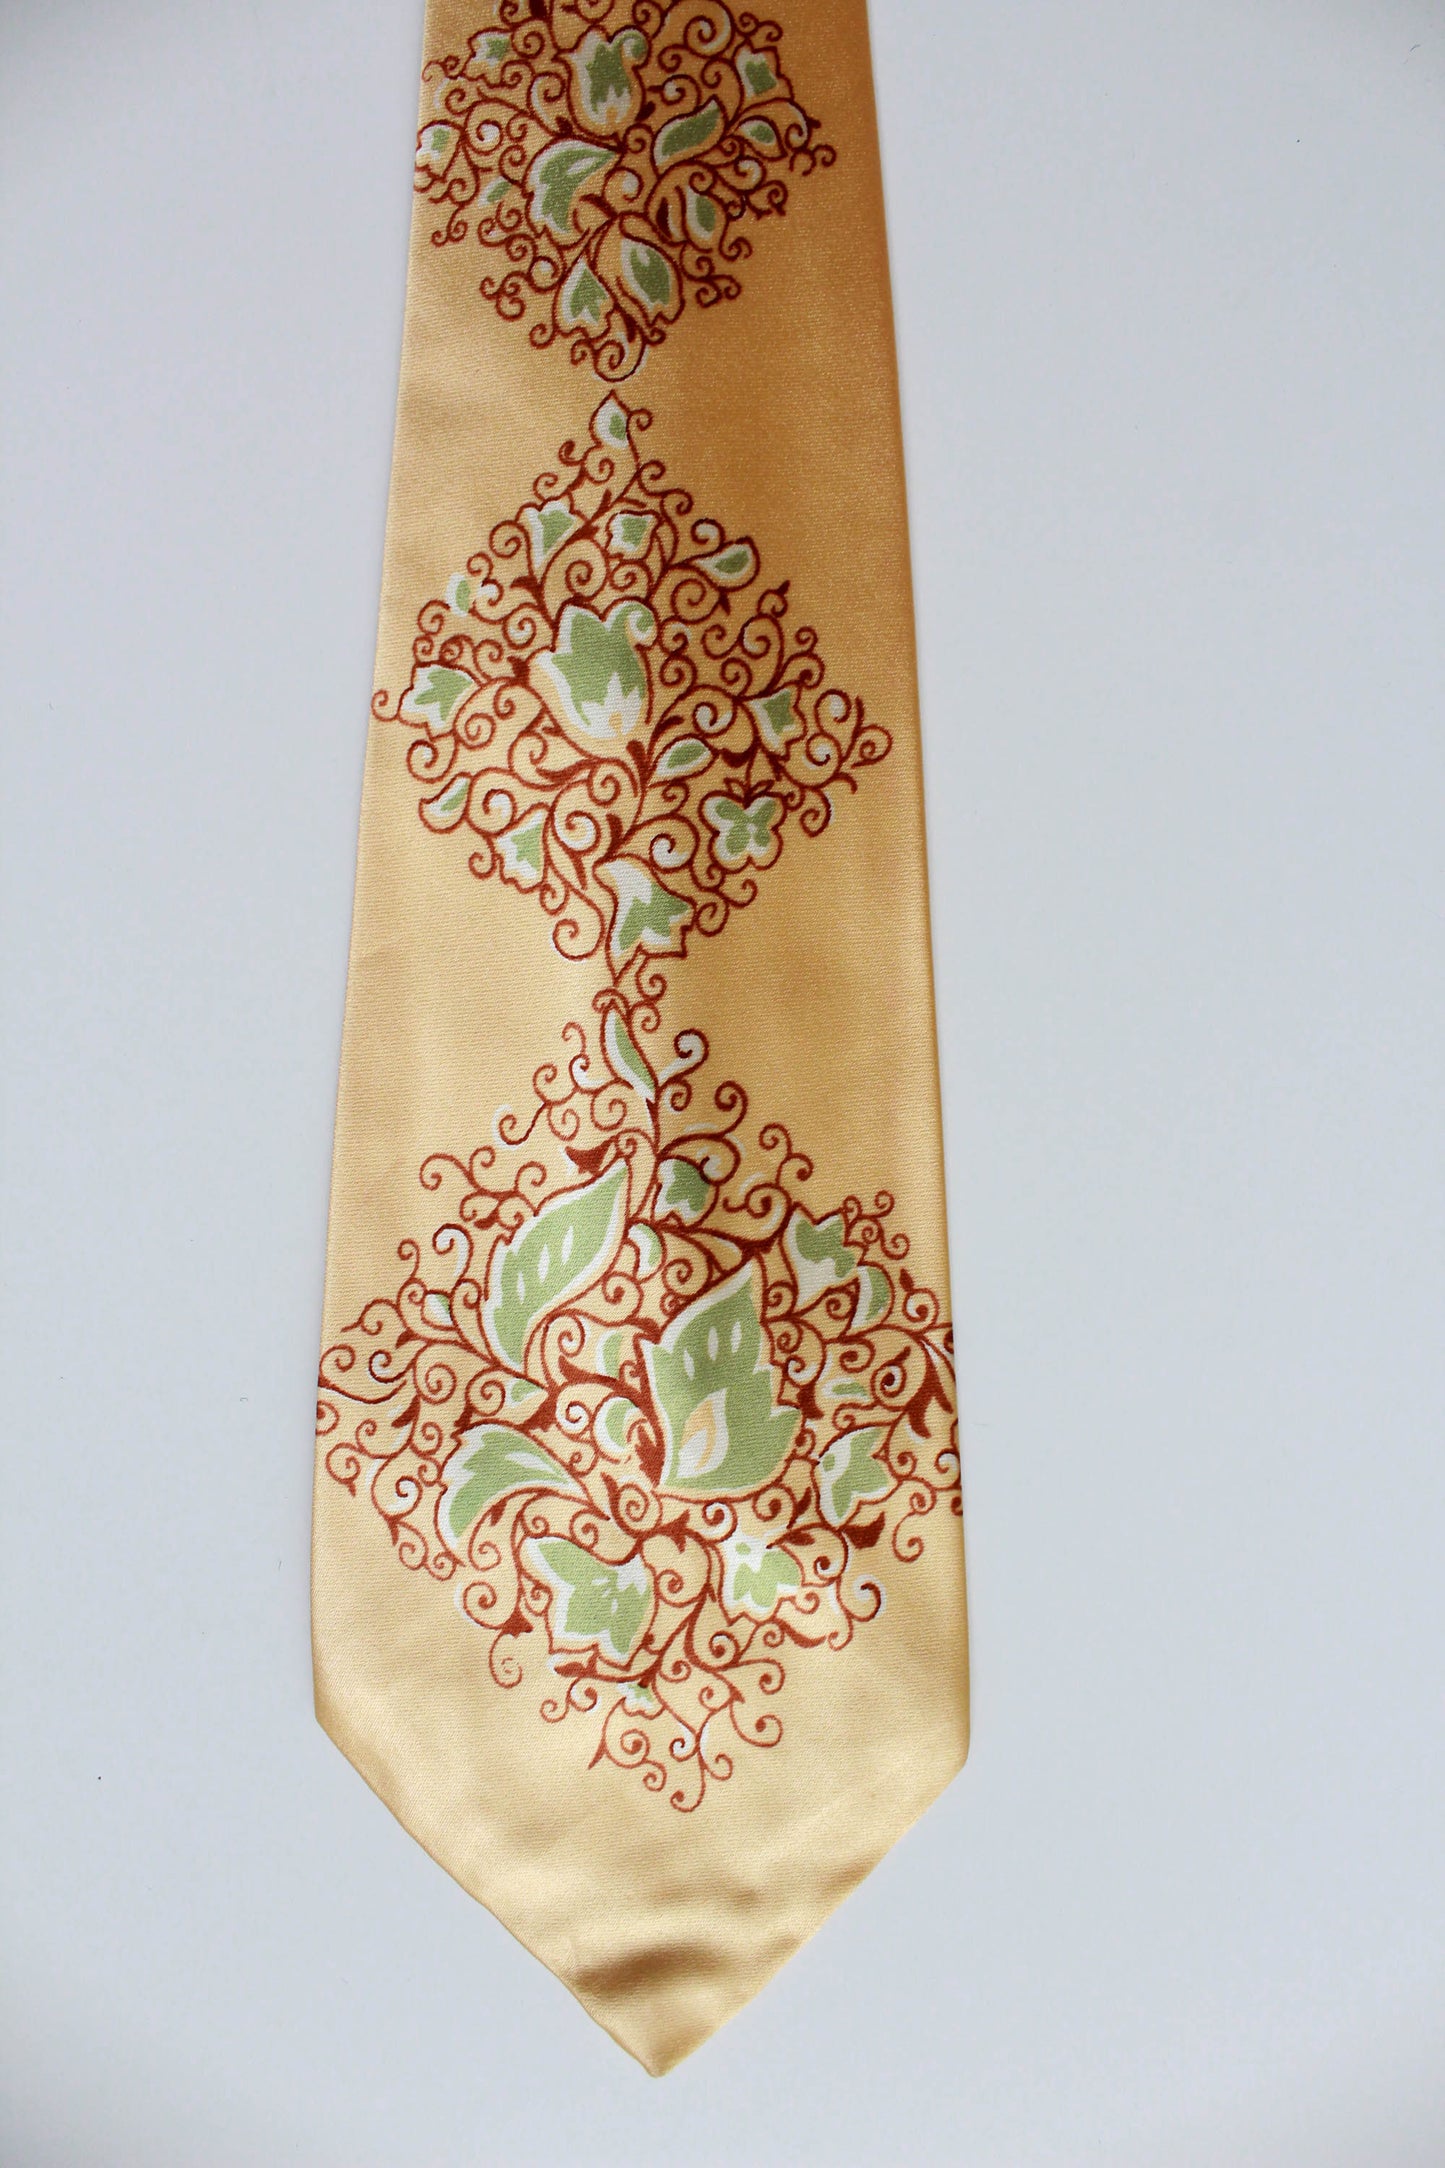 1940s yellow rayon necktie with wide tongue by Arrow. Brown and green ornate scrolling floral print design. vintage bold look necktie